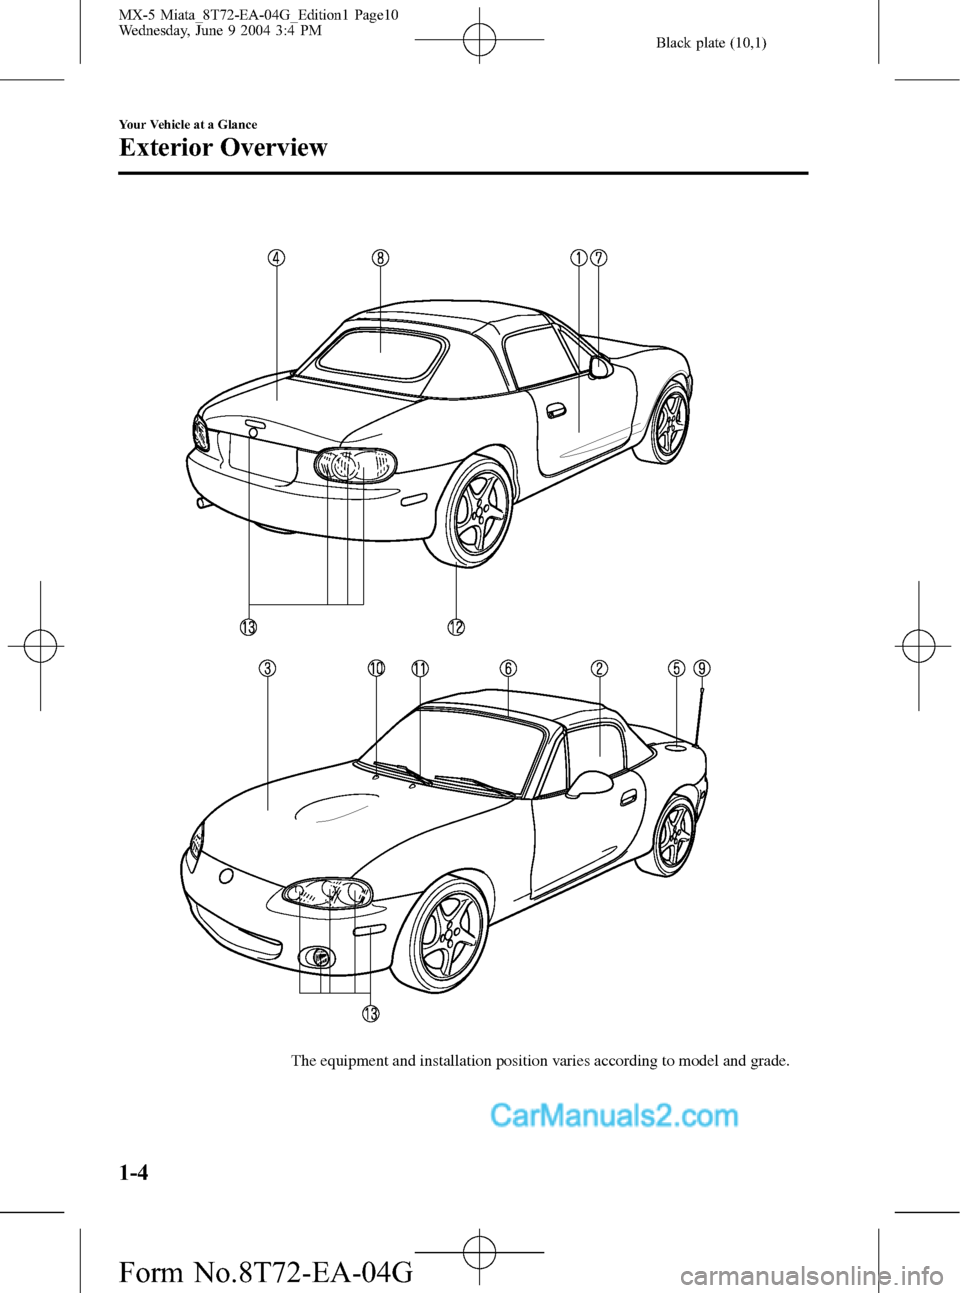 MAZDA MODEL MX-5 2005  Owners Manual (in English) Black plate (10,1)
The equipment and installation position varies according to model and grade.
1-4
Your Vehicle at a Glance
Exterior Overview
MX-5 Miata_8T72-EA-04G_Edition1 Page10
Wednesday, June 9 